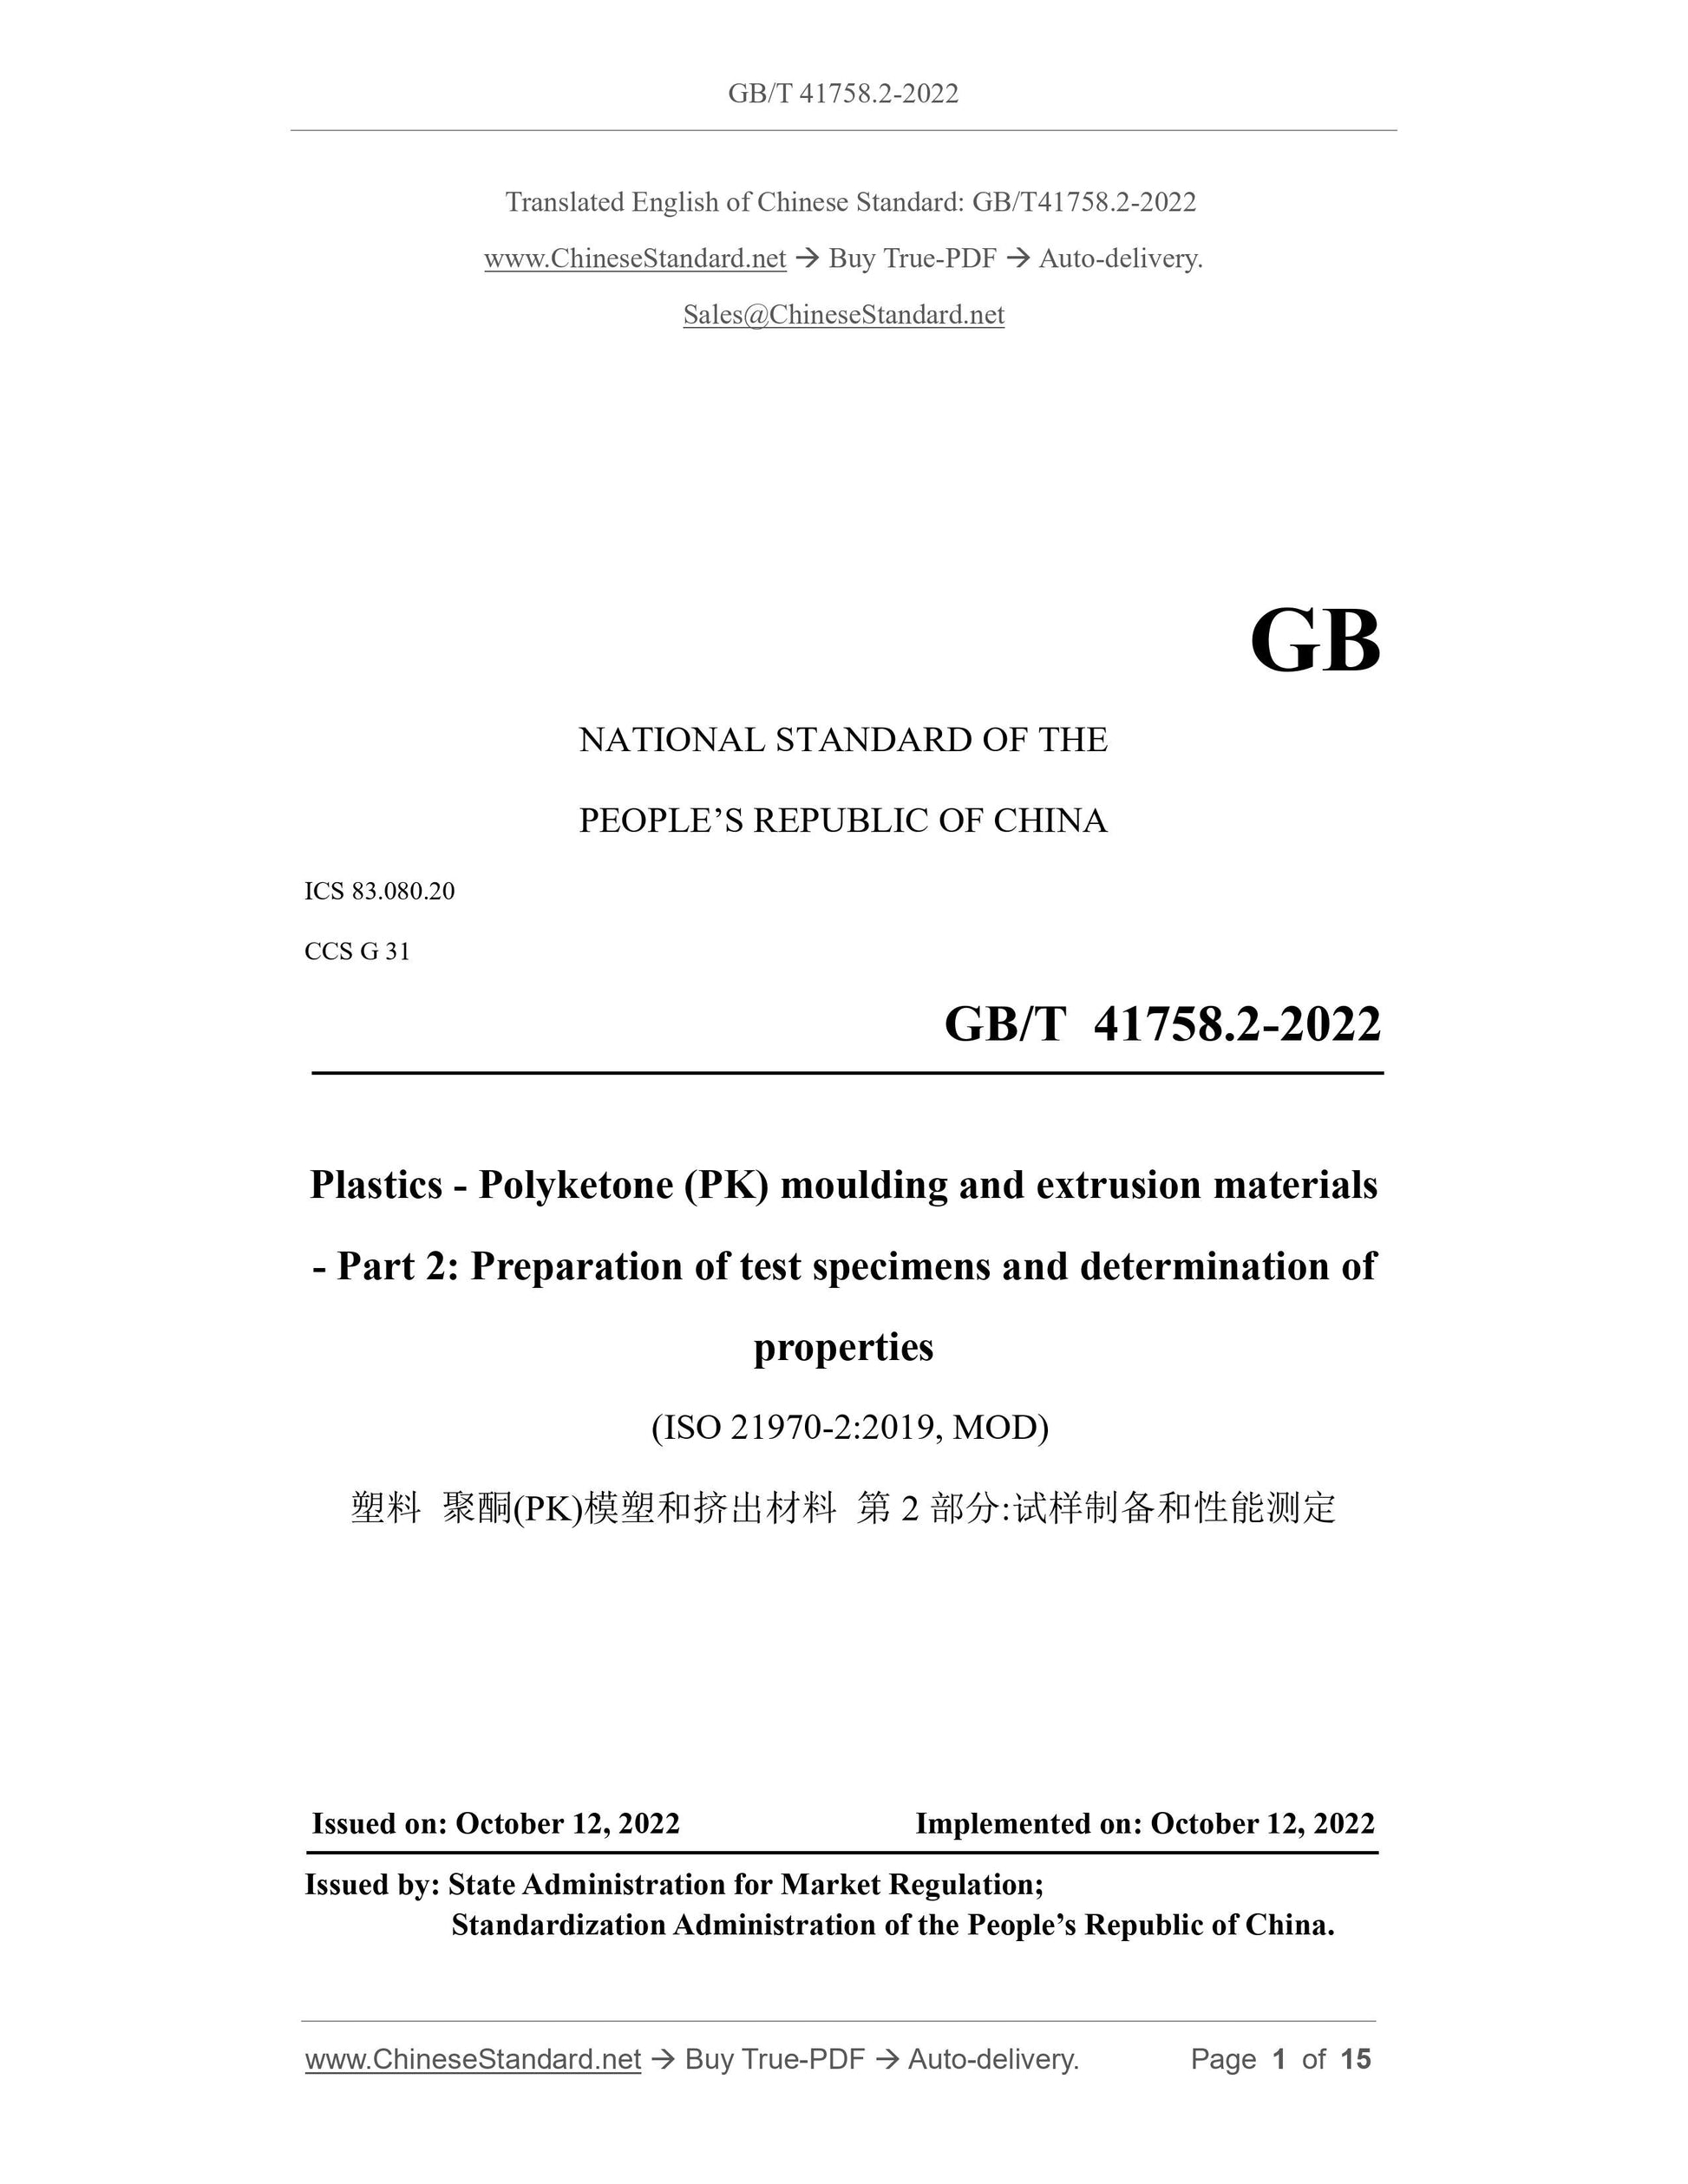 GB/T 41758.2-2022 Page 1